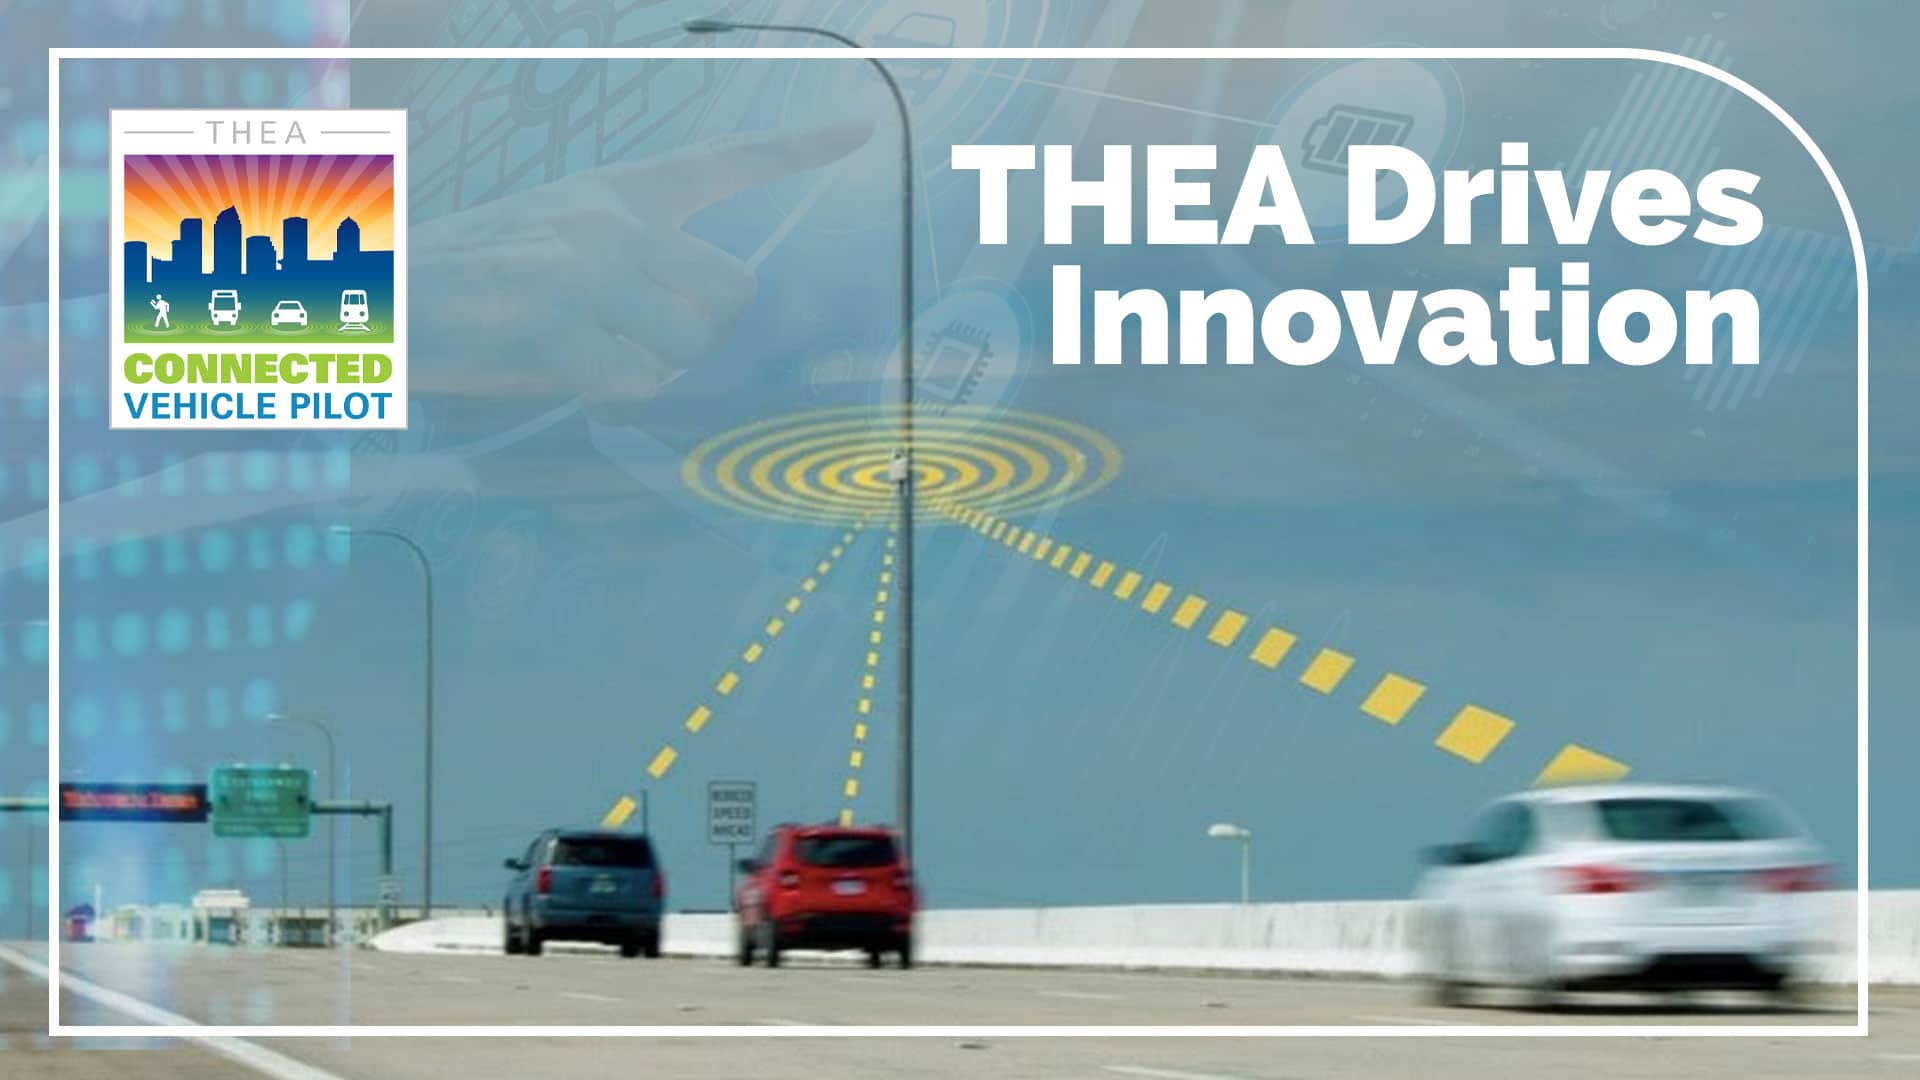 THEA CV Pilot Testbed for Safety Technology